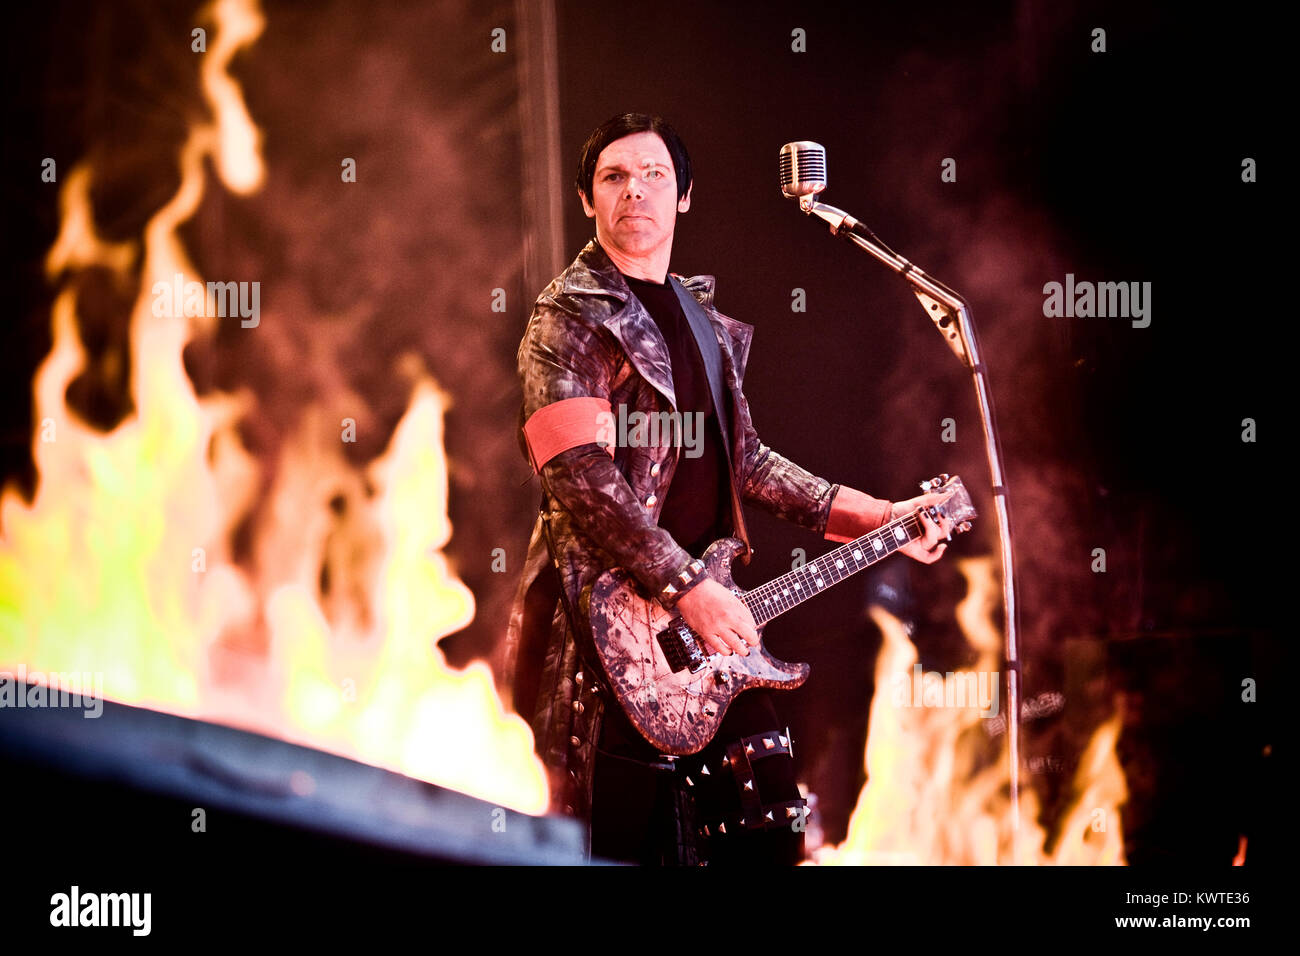 The German industrial metal band Rammstein performs a live concert at  Copenhagen Live 2010 at Tiøren. Here the band's guitarist Richard Zven  Kruspe is pictured live on stage. Denmark 02/06 2010 Stock Photo - Alamy